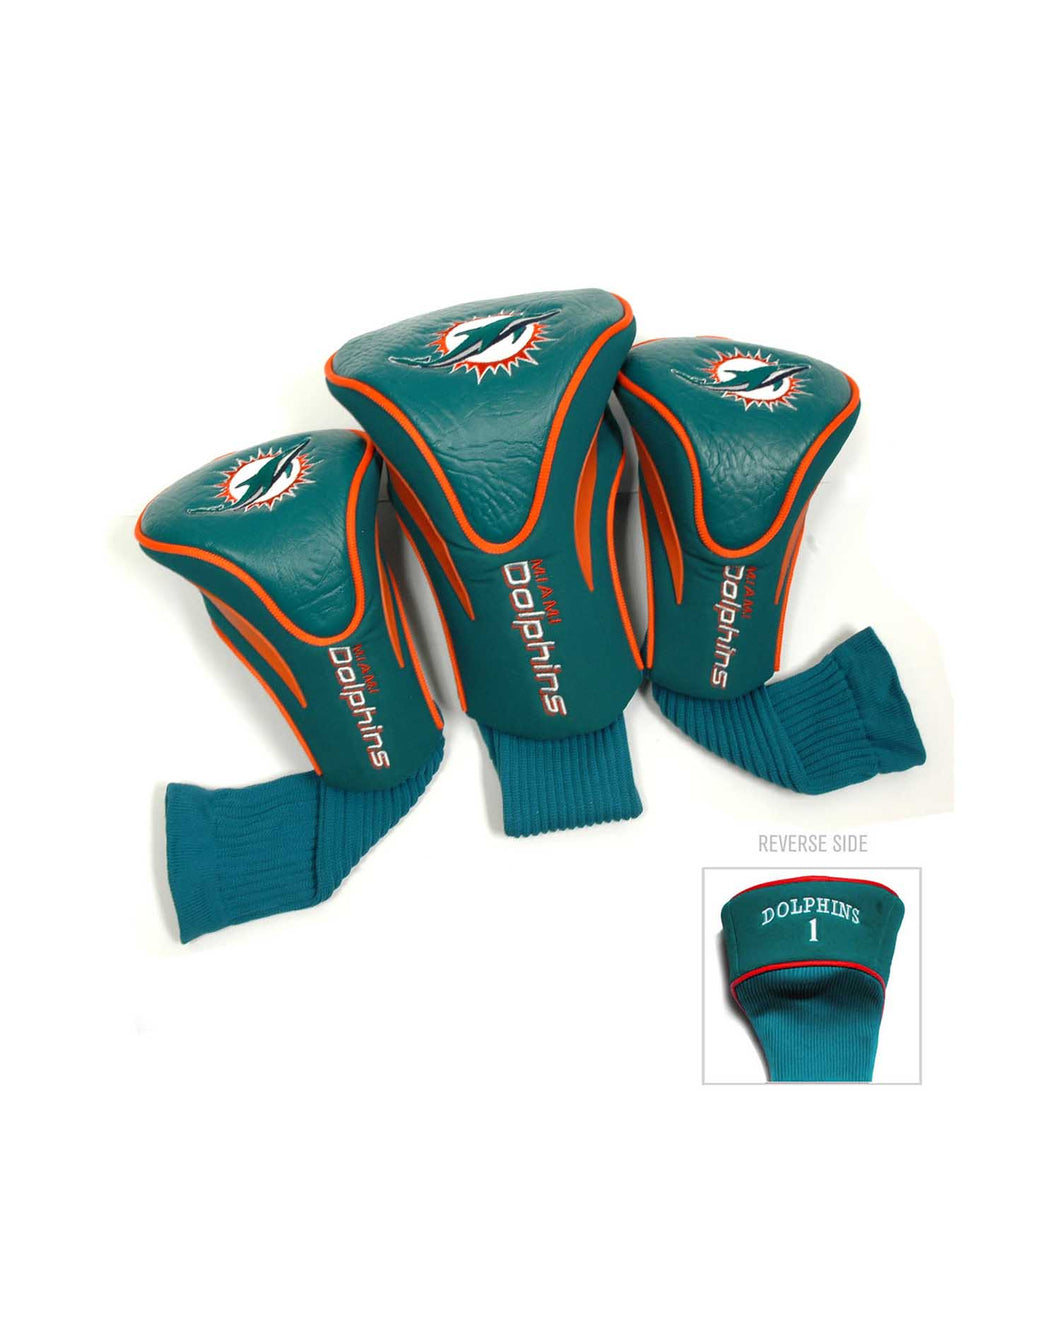 NFL Official Set of 3 Contour Golf Driver, 3 and X Headcovers. Miami Dolphins.